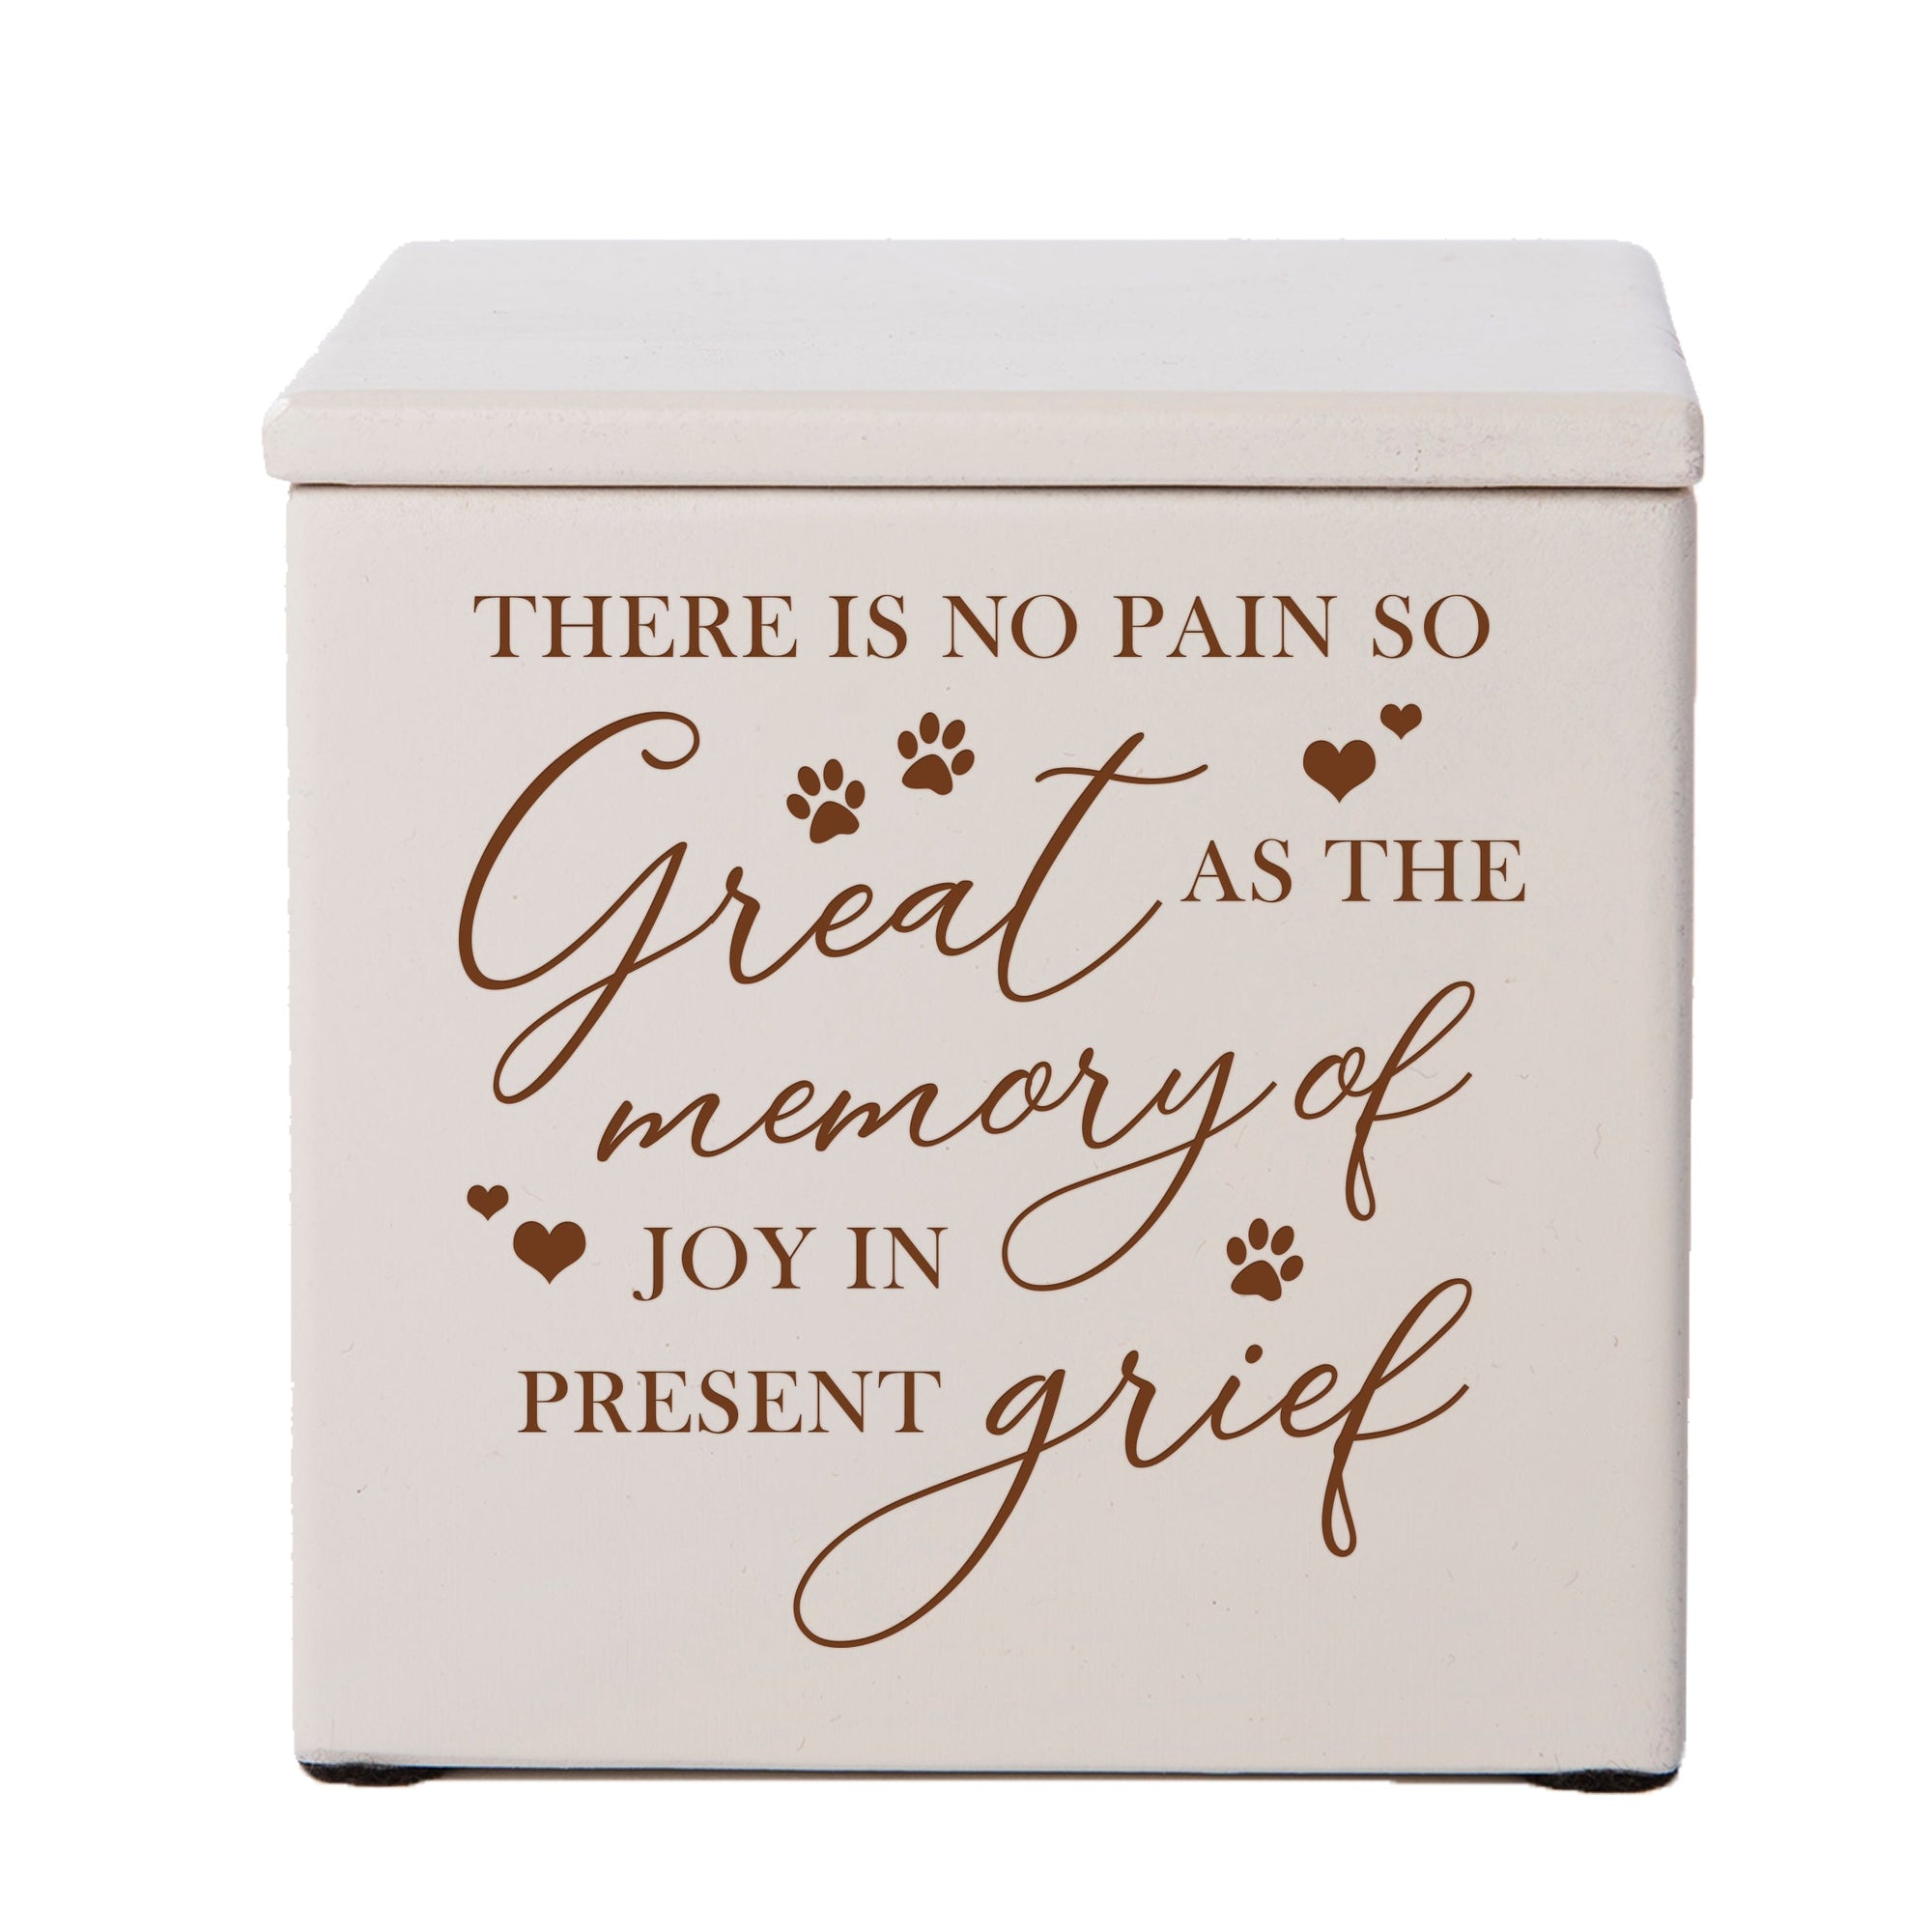 Pet Memorial Keepsake Cremation Urn Box for Dog or Cat - There Is No Pain So Great